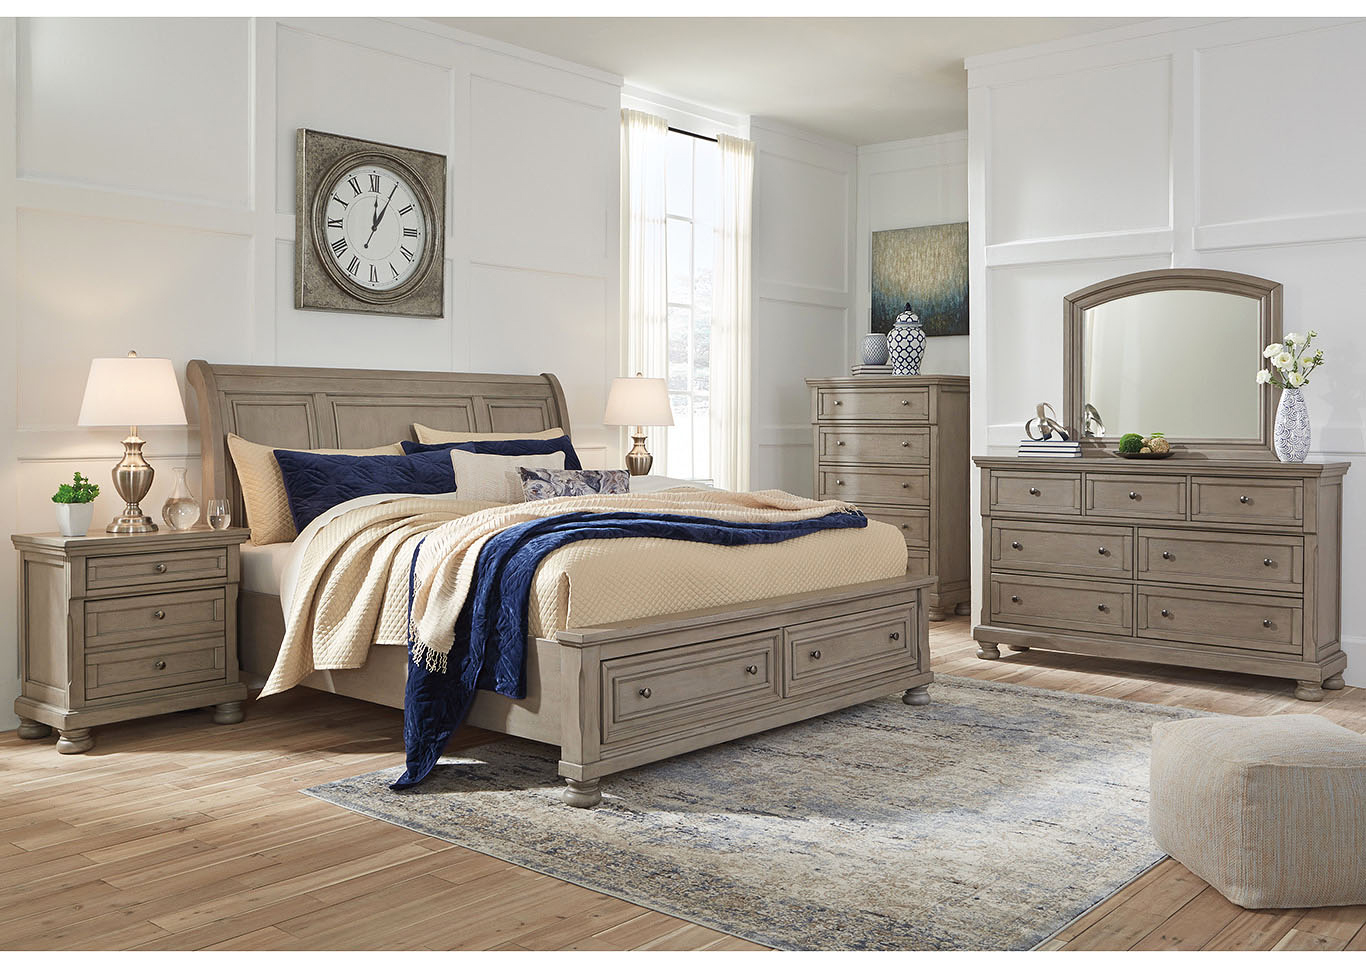 Ashley Furniture Home Store unveils stylish bedroom furniture